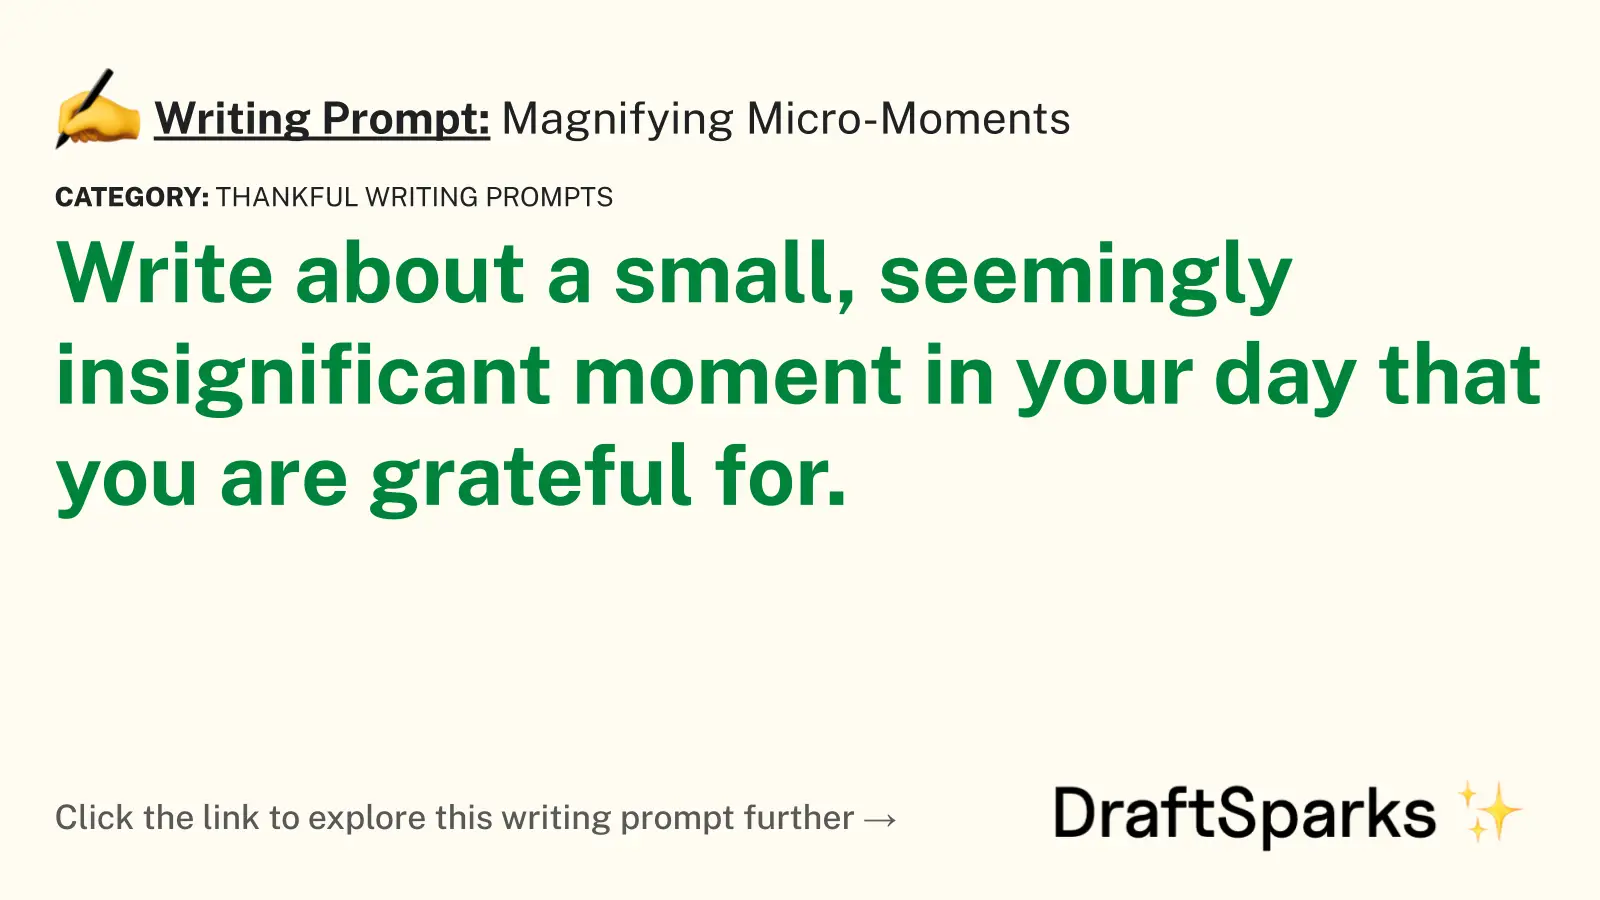 Magnifying Micro-Moments